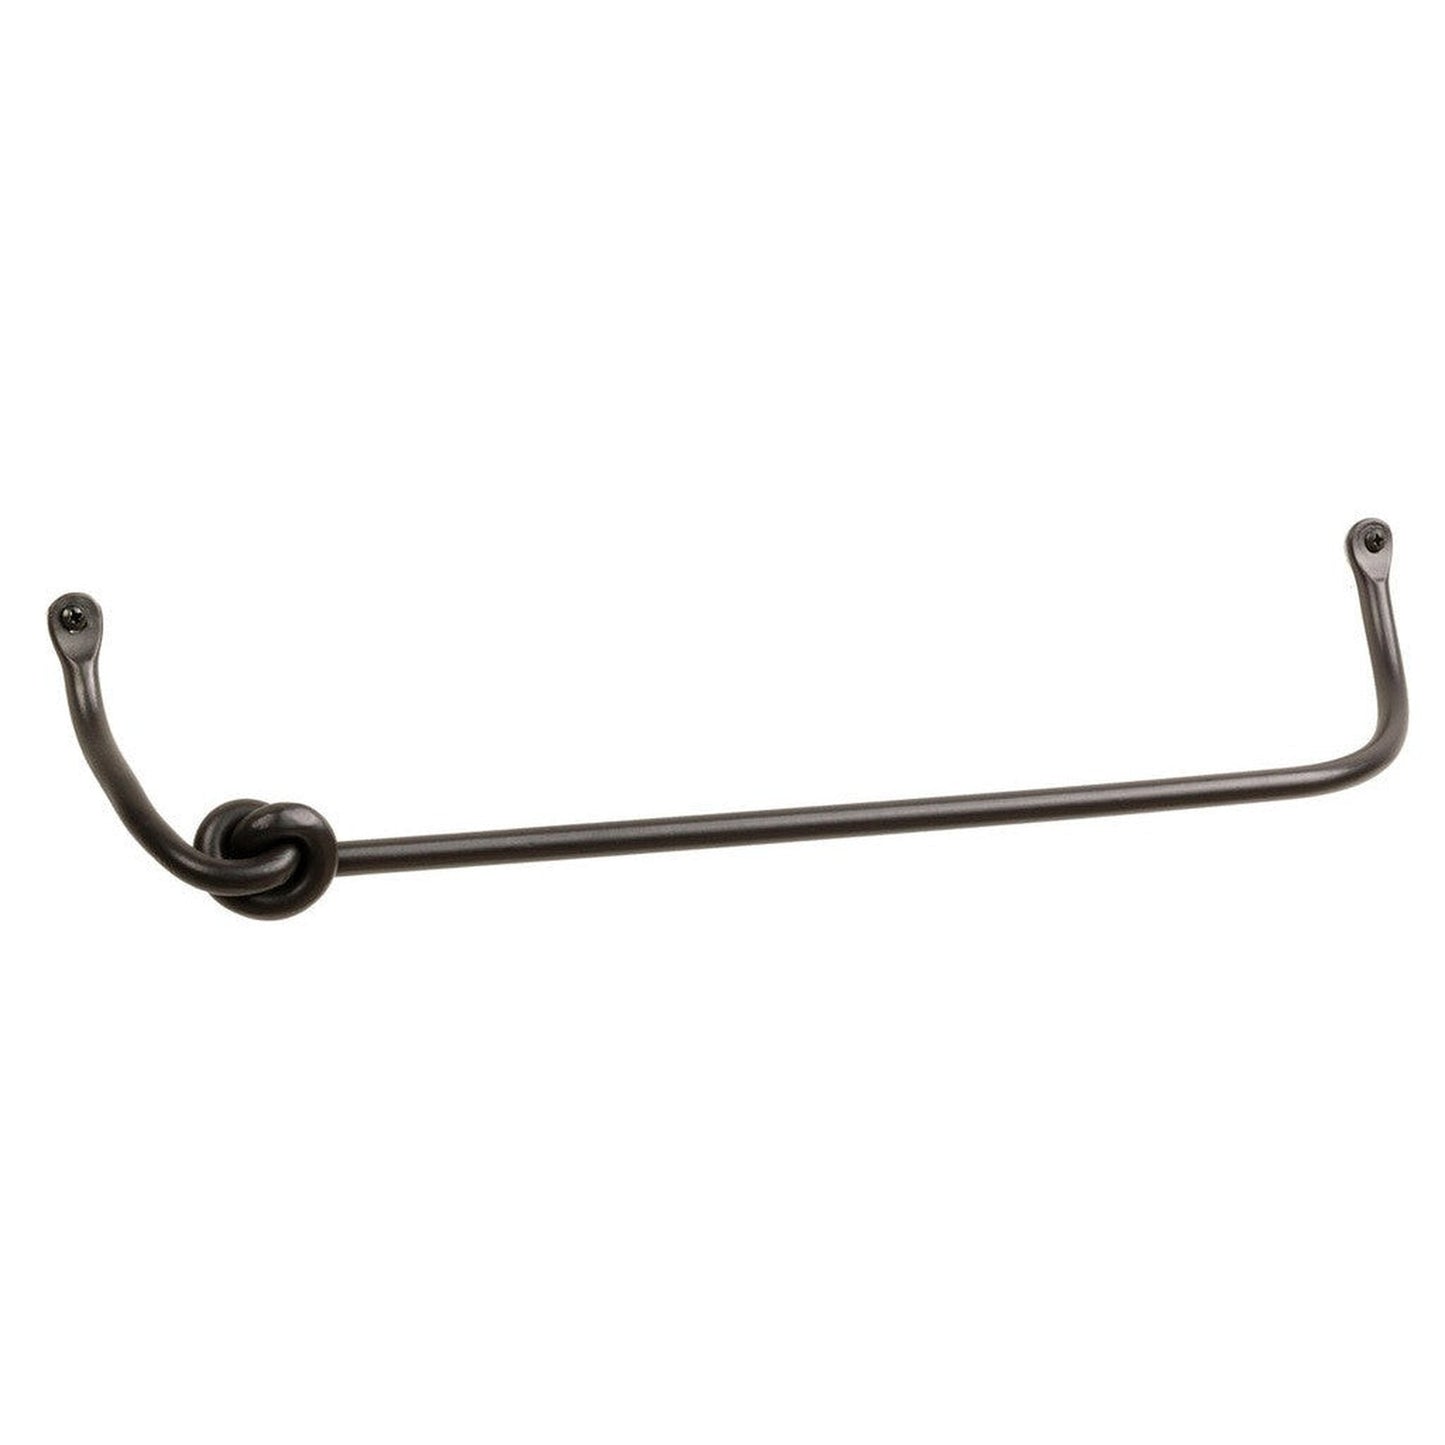 Stone County Ironworks Knot 24" Woodland Brown Iron Towel Bar With Copper Iron Accent